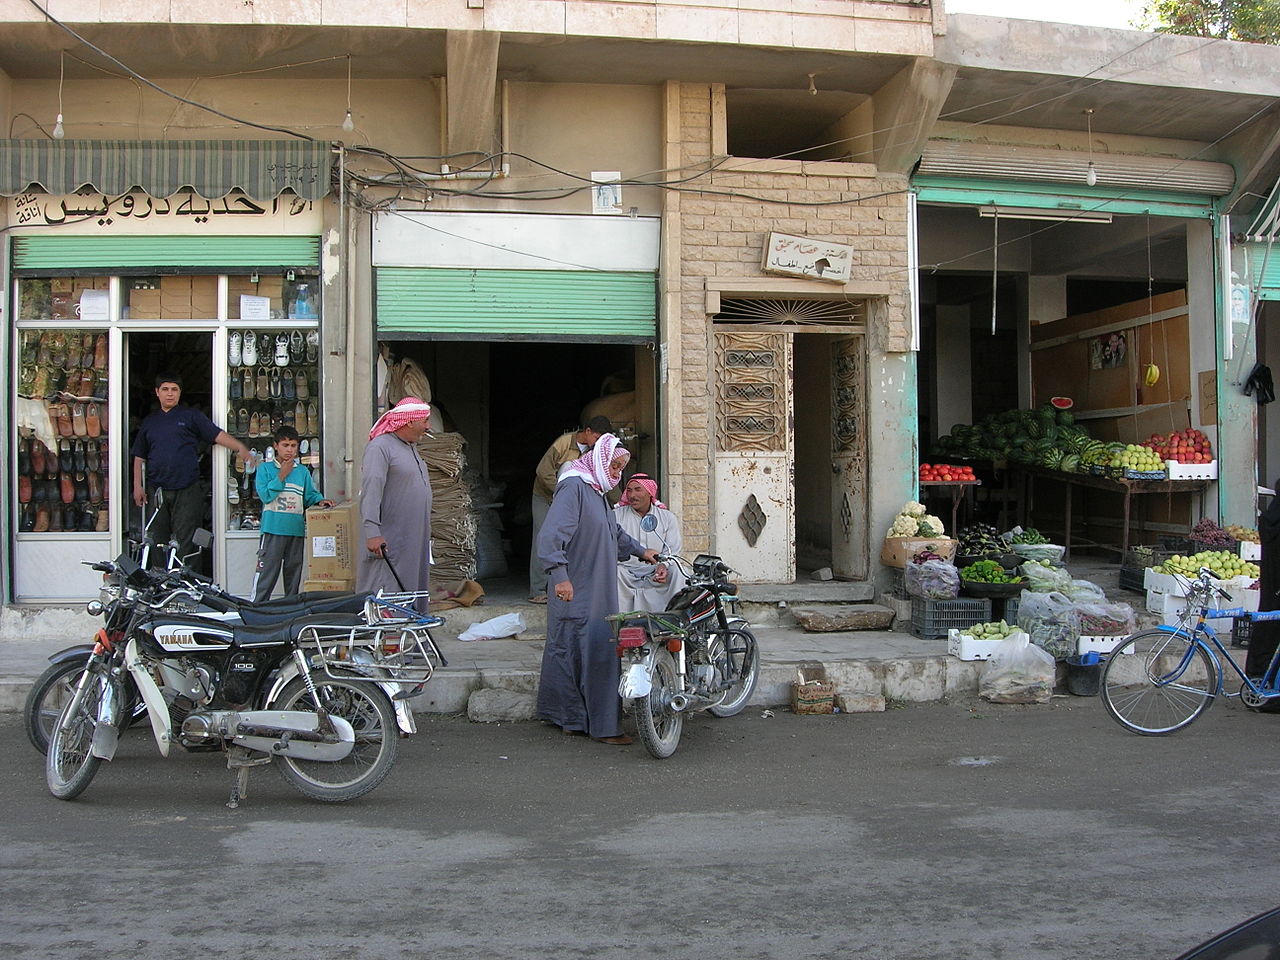 A street view of Manbij city in Syria